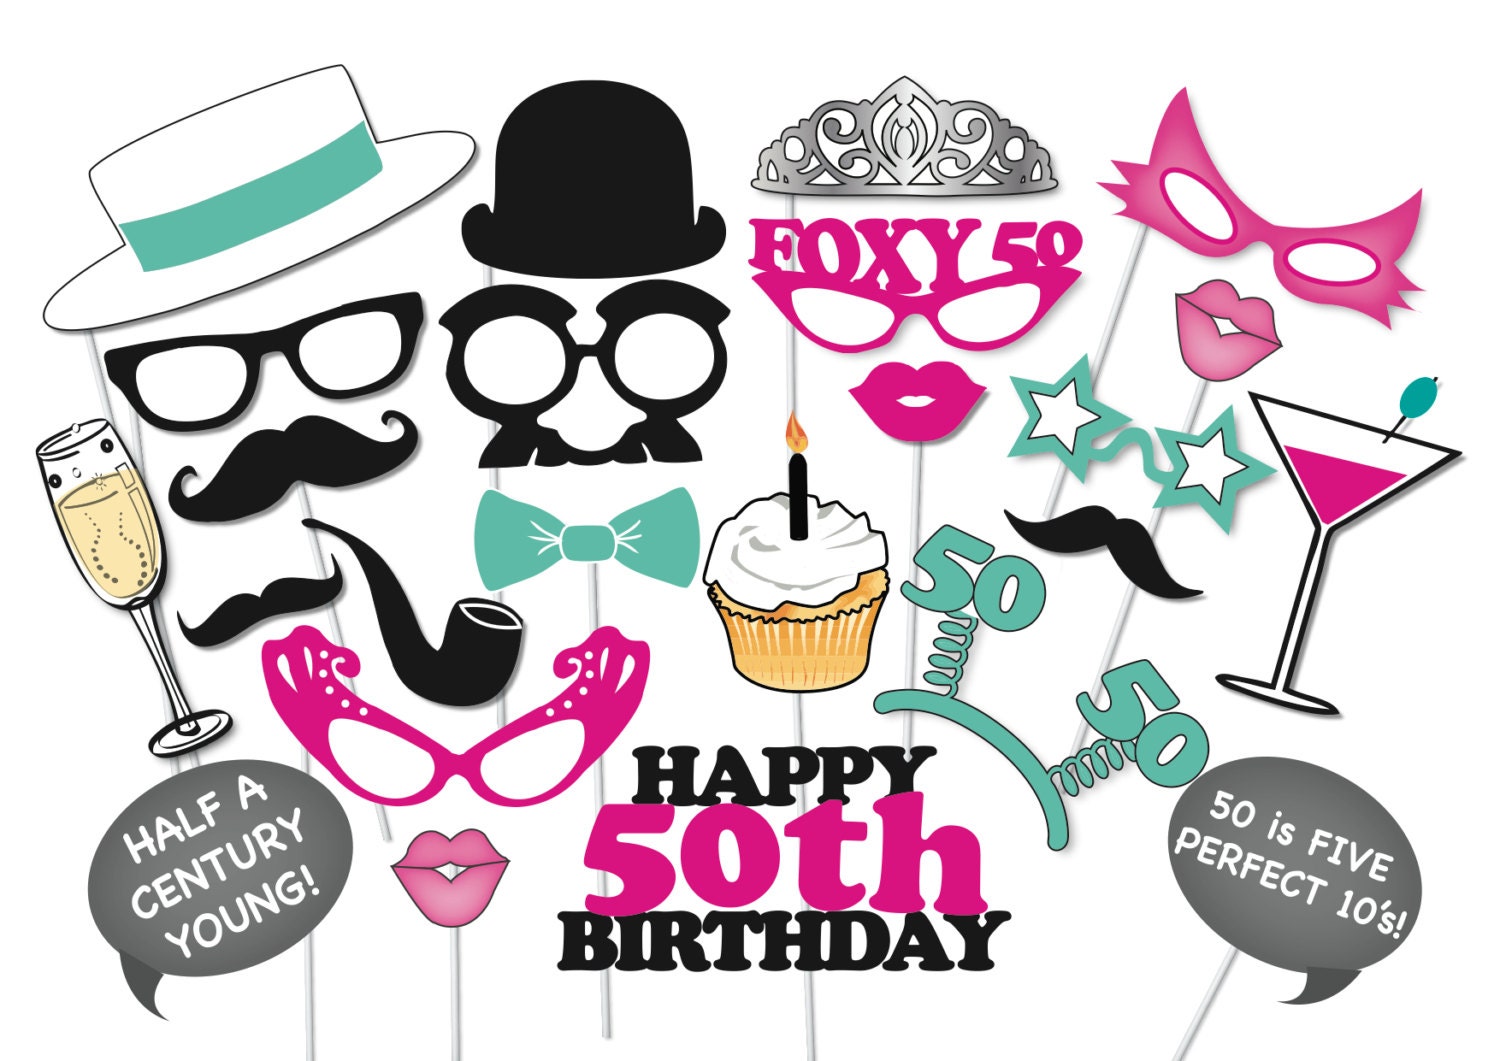 50th-birthday-photobooth-party-props-set-26-piece-printable